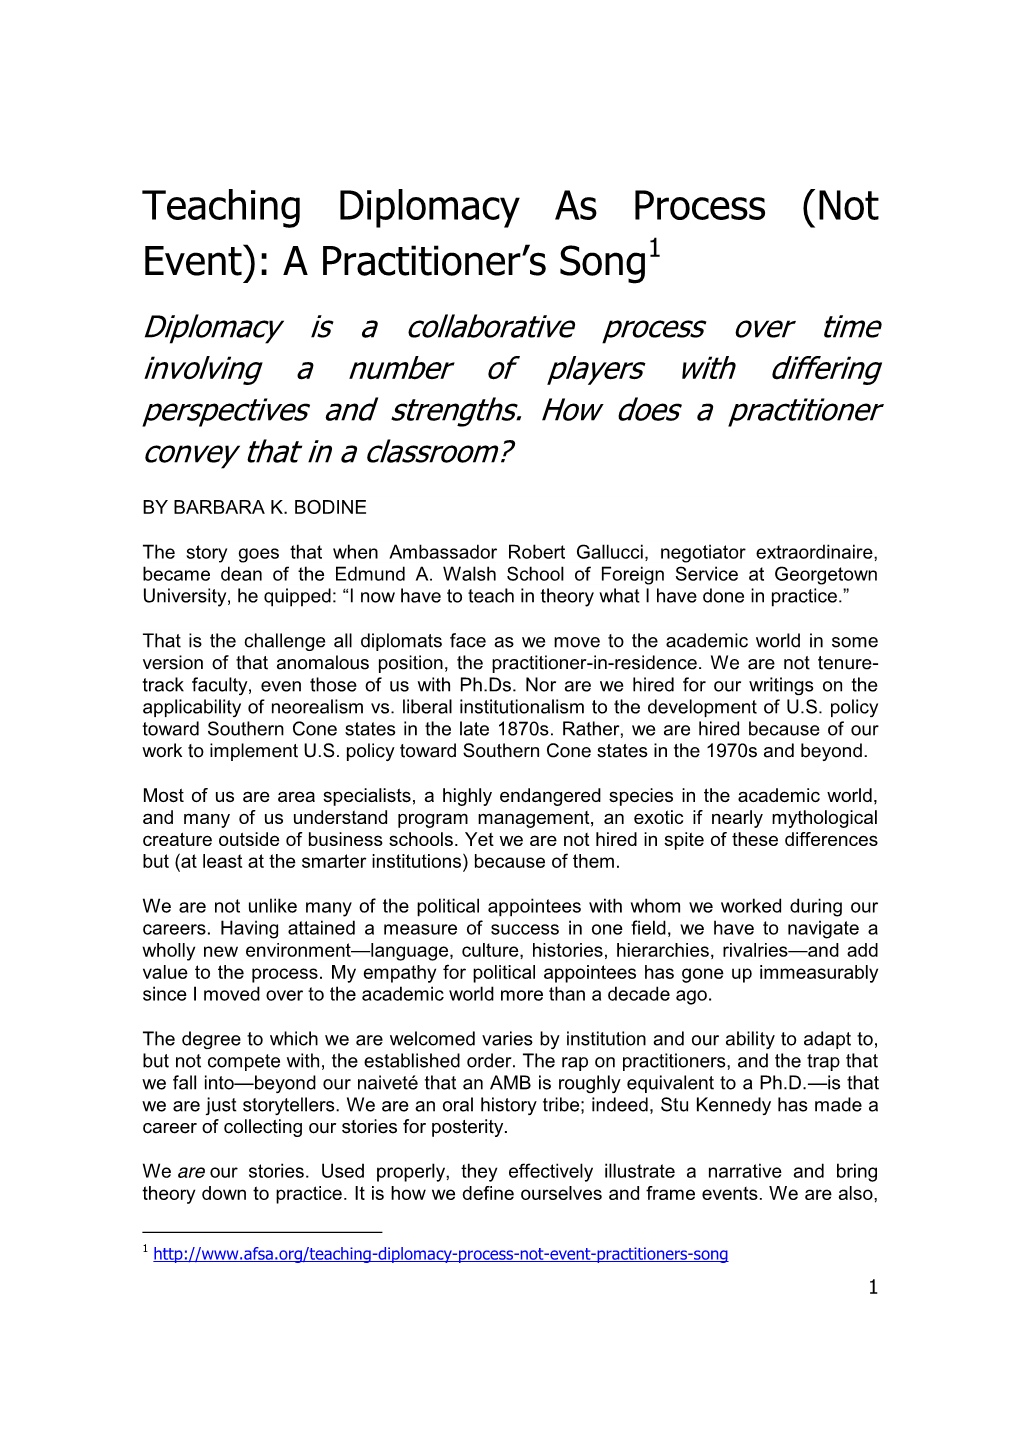 Teaching Diplomacy As Process (Not Event): a Practitioner’S Song1